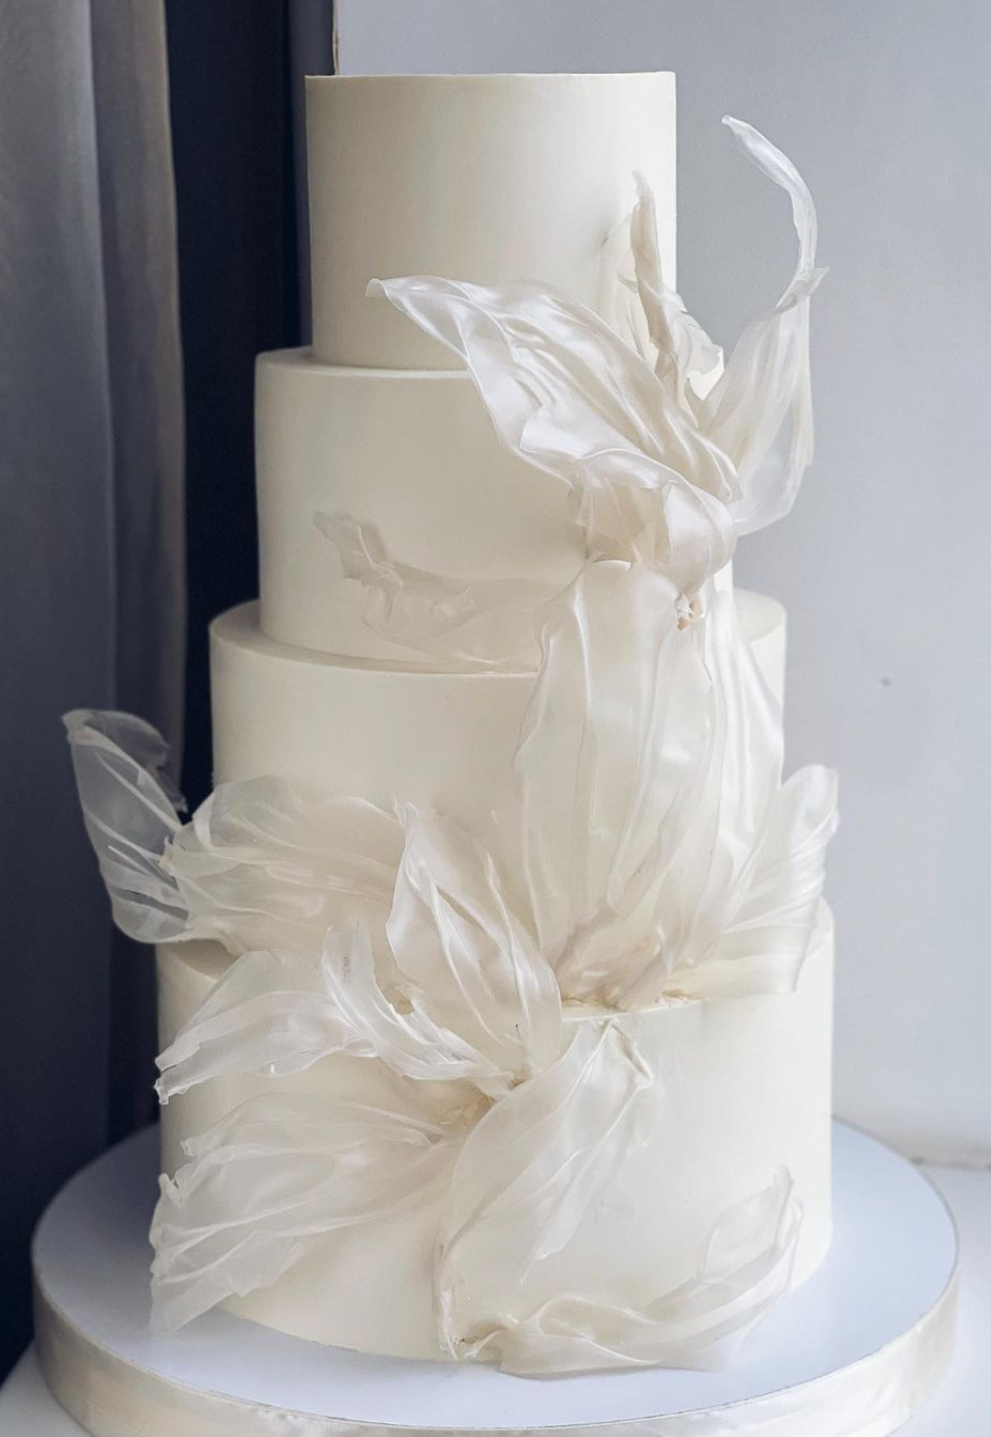 Sweet Wedding Cake Trends 2022 You Want to Steal